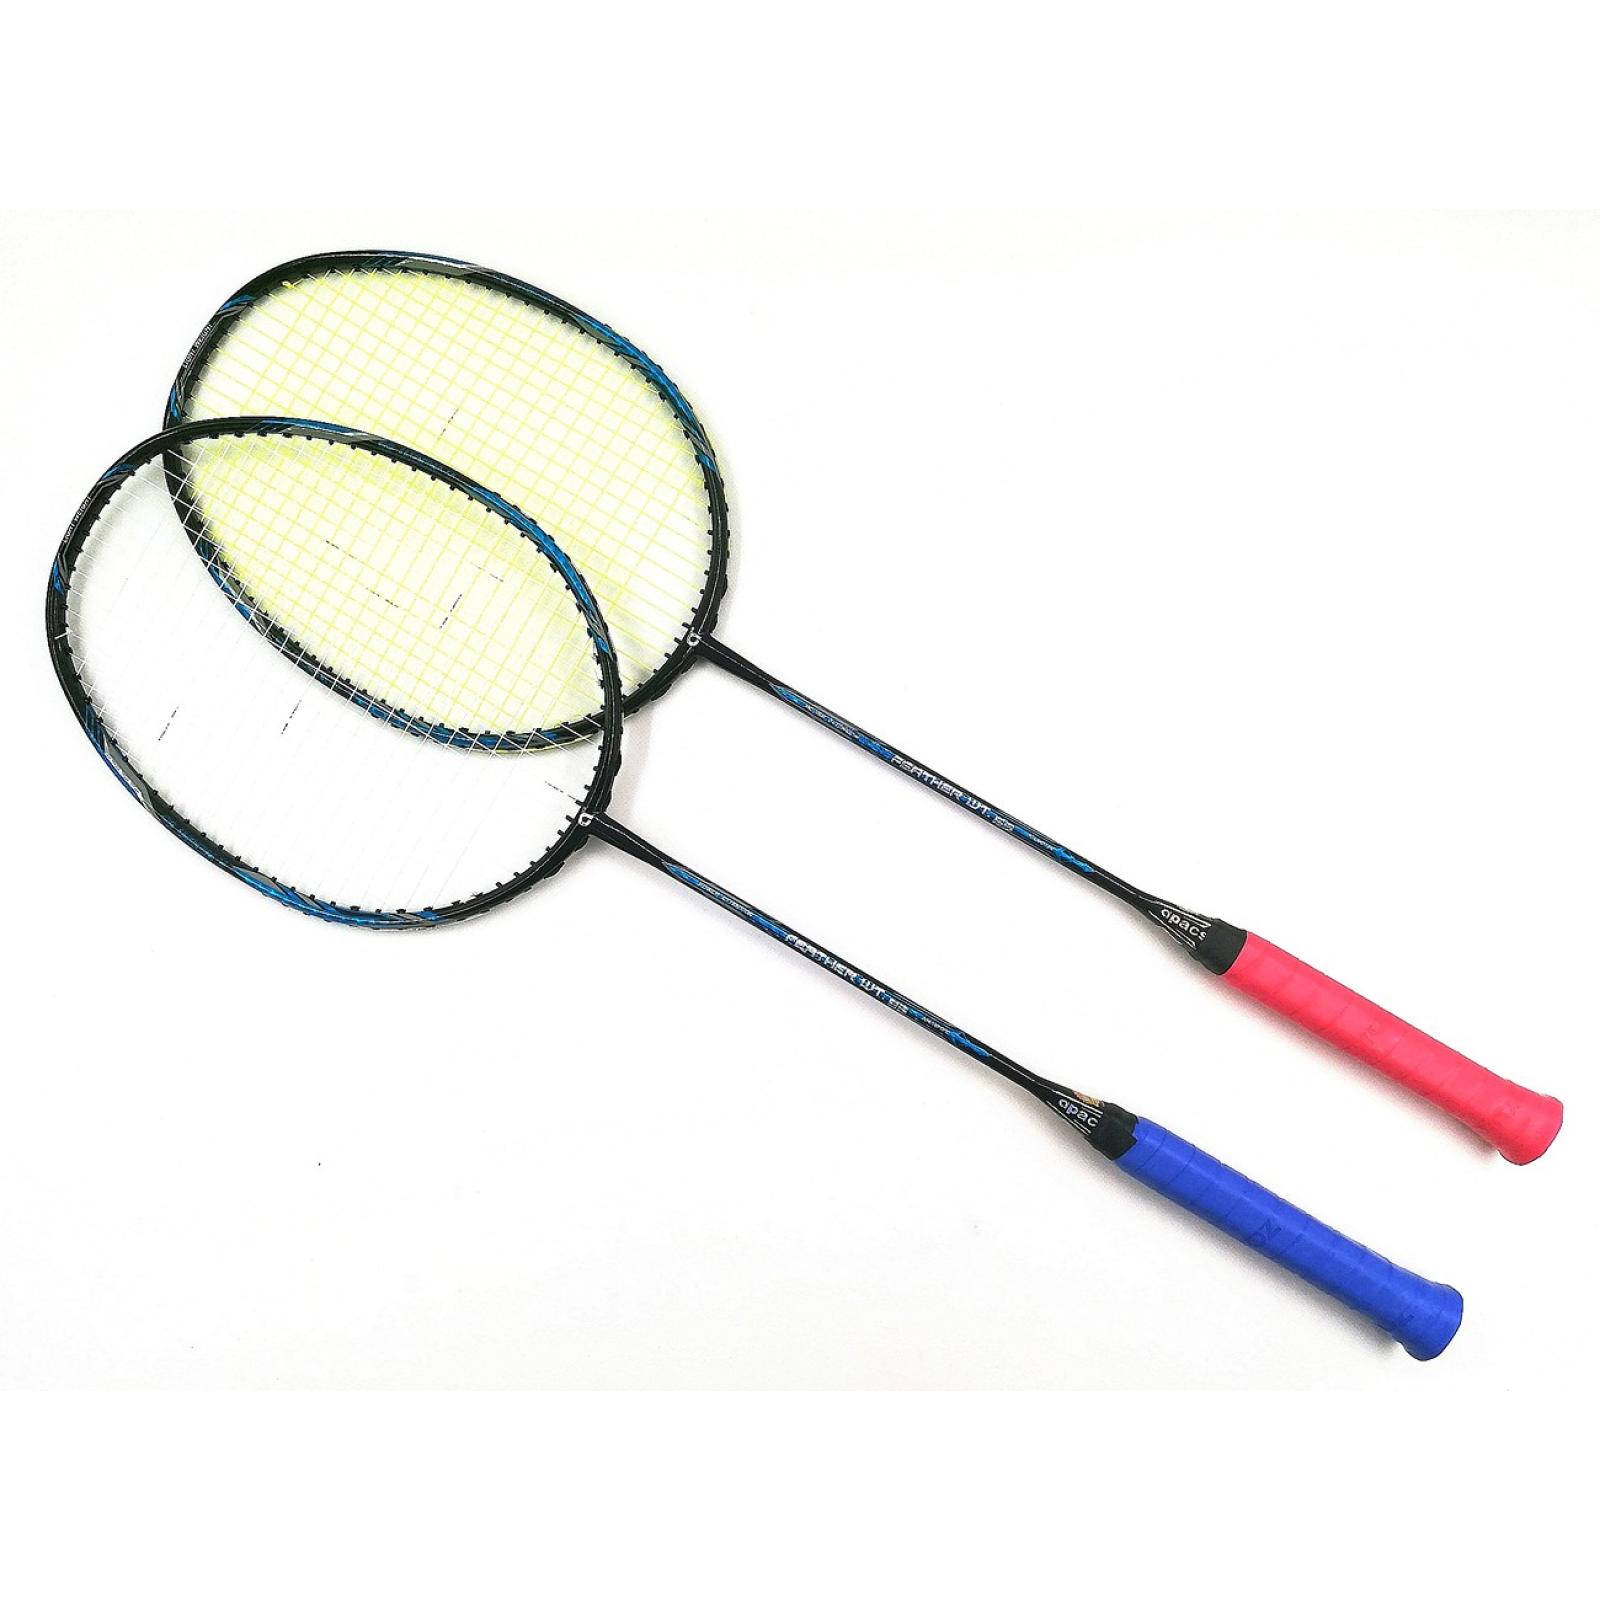 Badminton Racket FREE Apacs String & Grip Red/Blue Apacs Feather Weight 55 